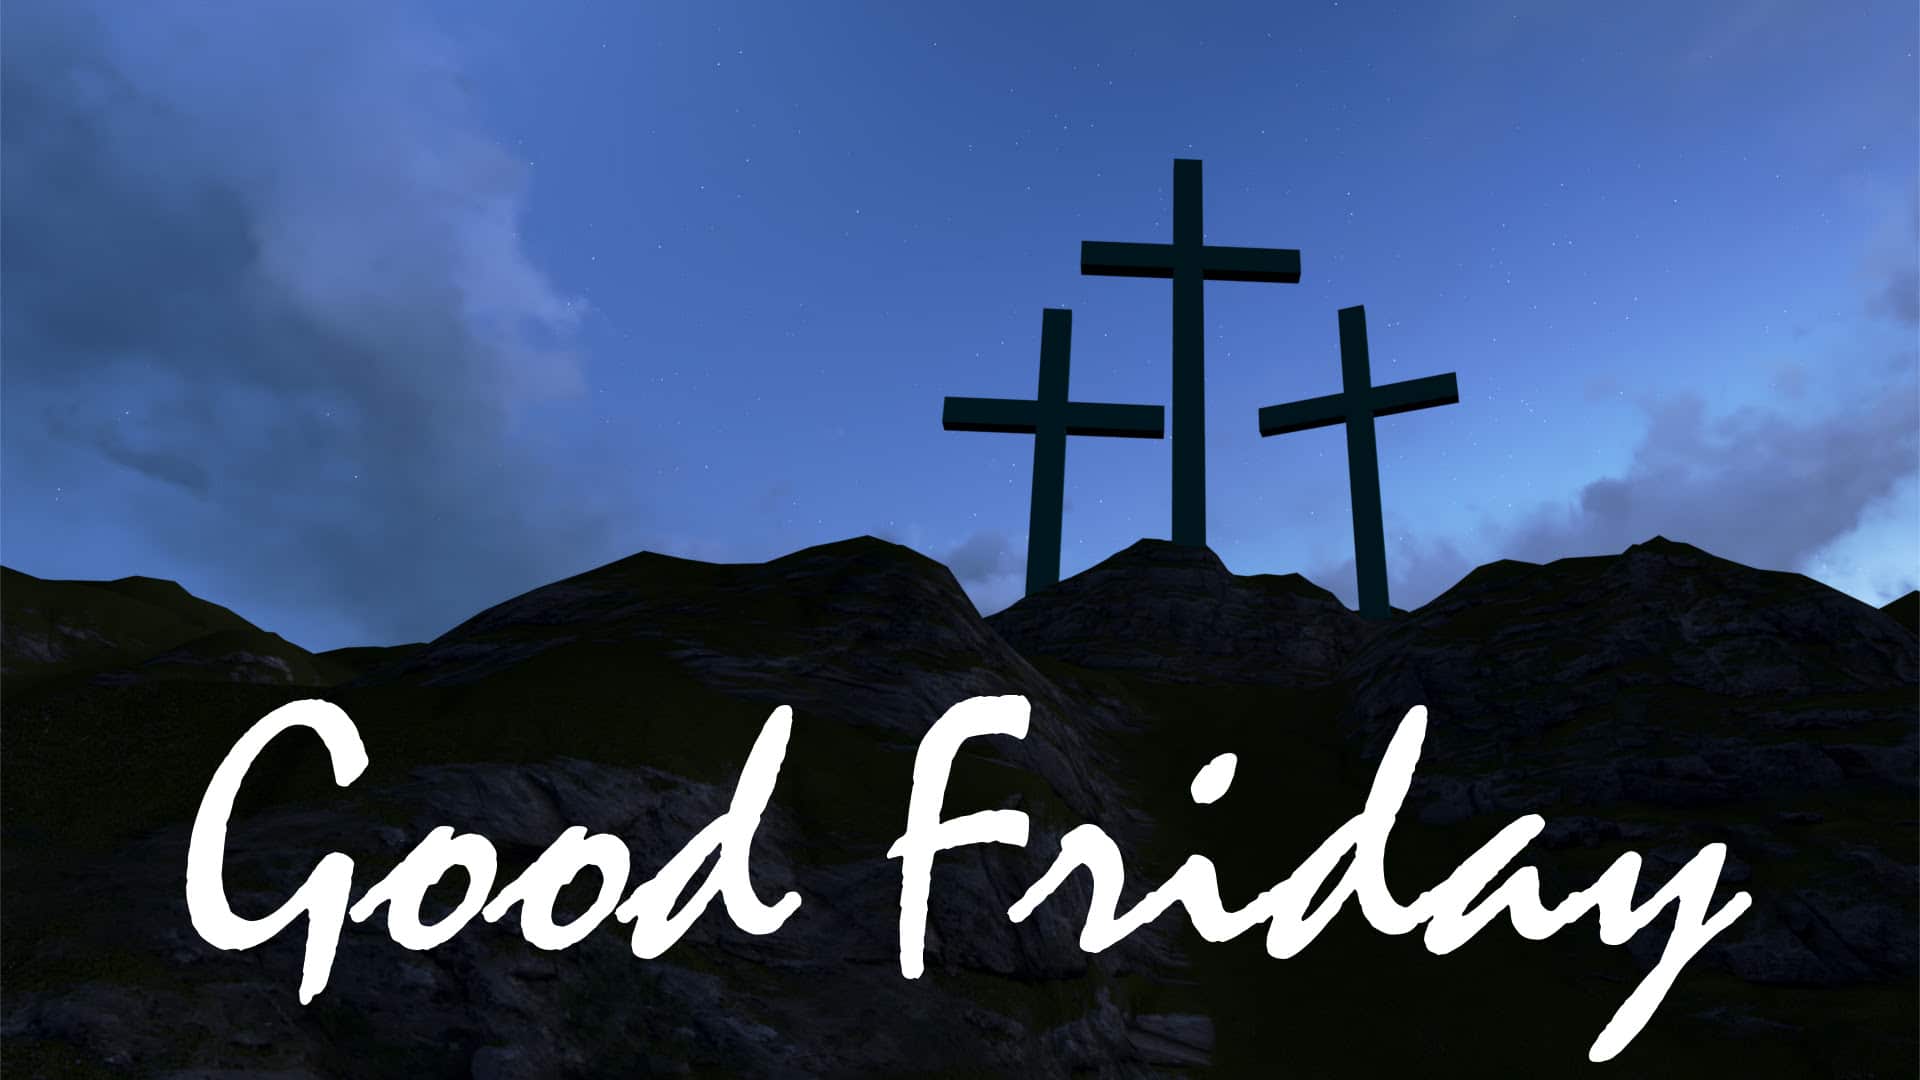 Good Friday Image 2018. Happy Good Friday Picture Photo Wallpaper